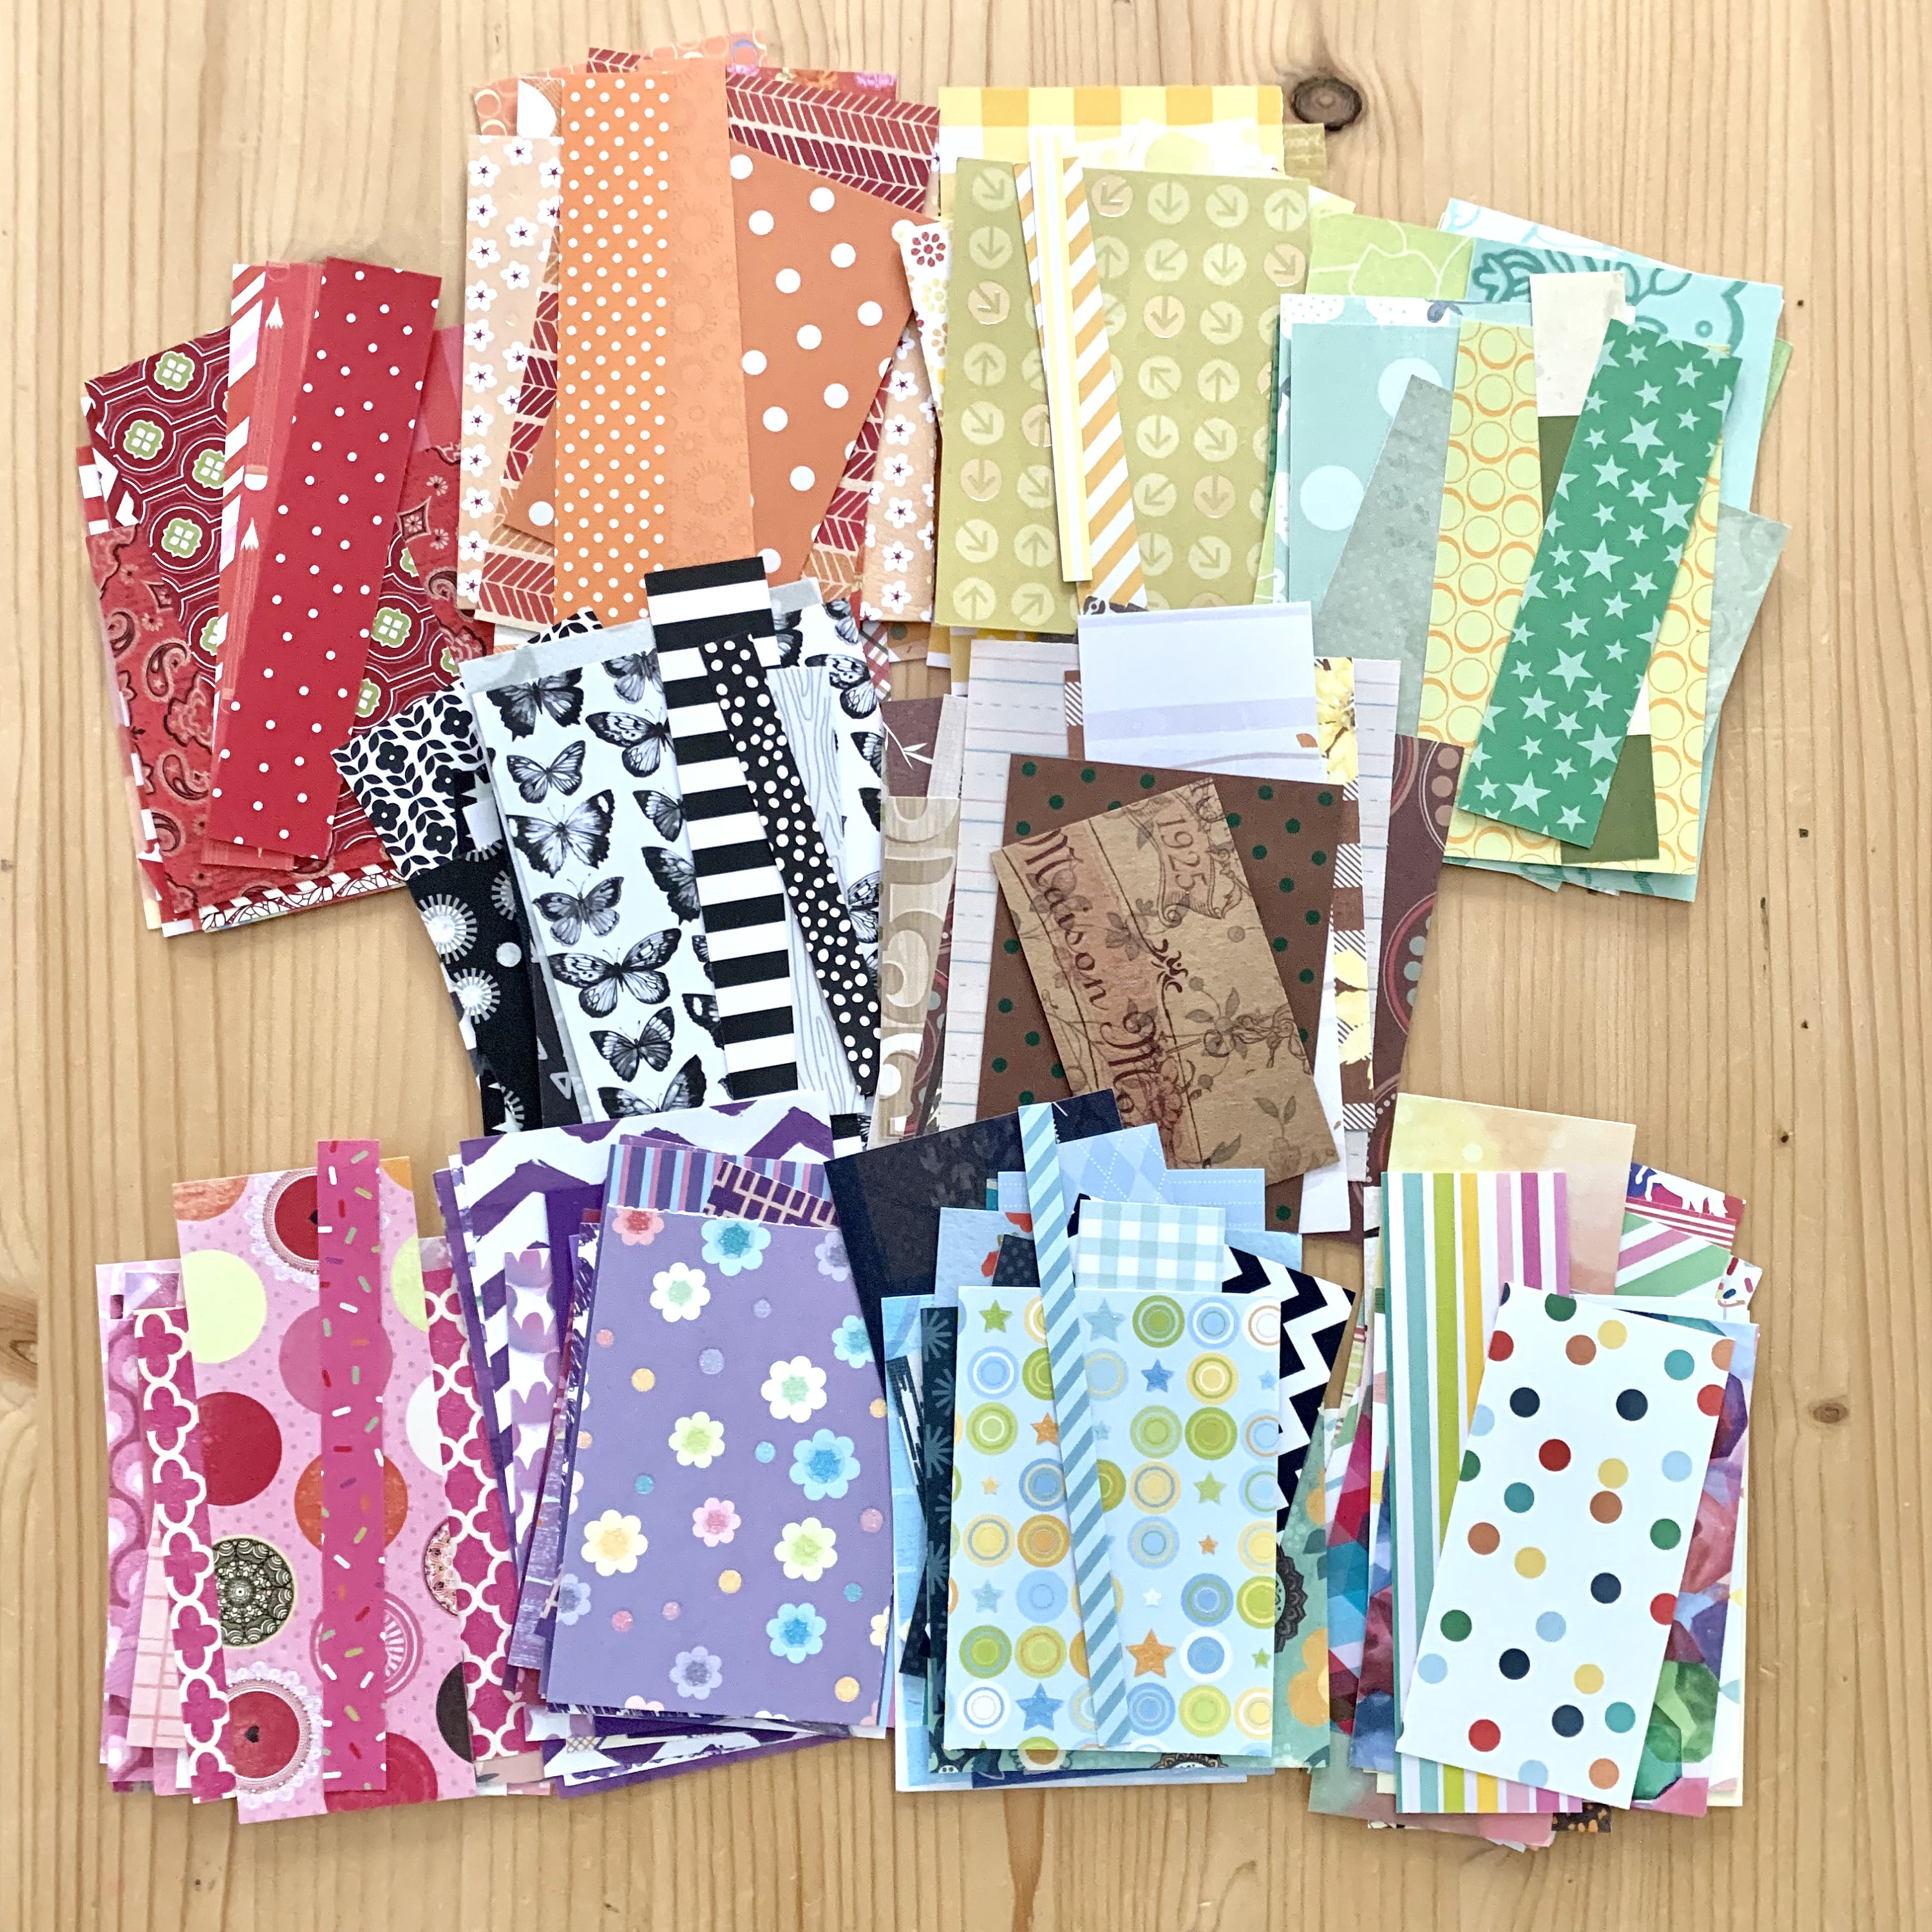 Random Fabric Scrap Pack, 3 Oz of Random Size Fabric Scraps, Small Scrap  Pieces, Perfect for Crafts and Collage and Junk Journals 